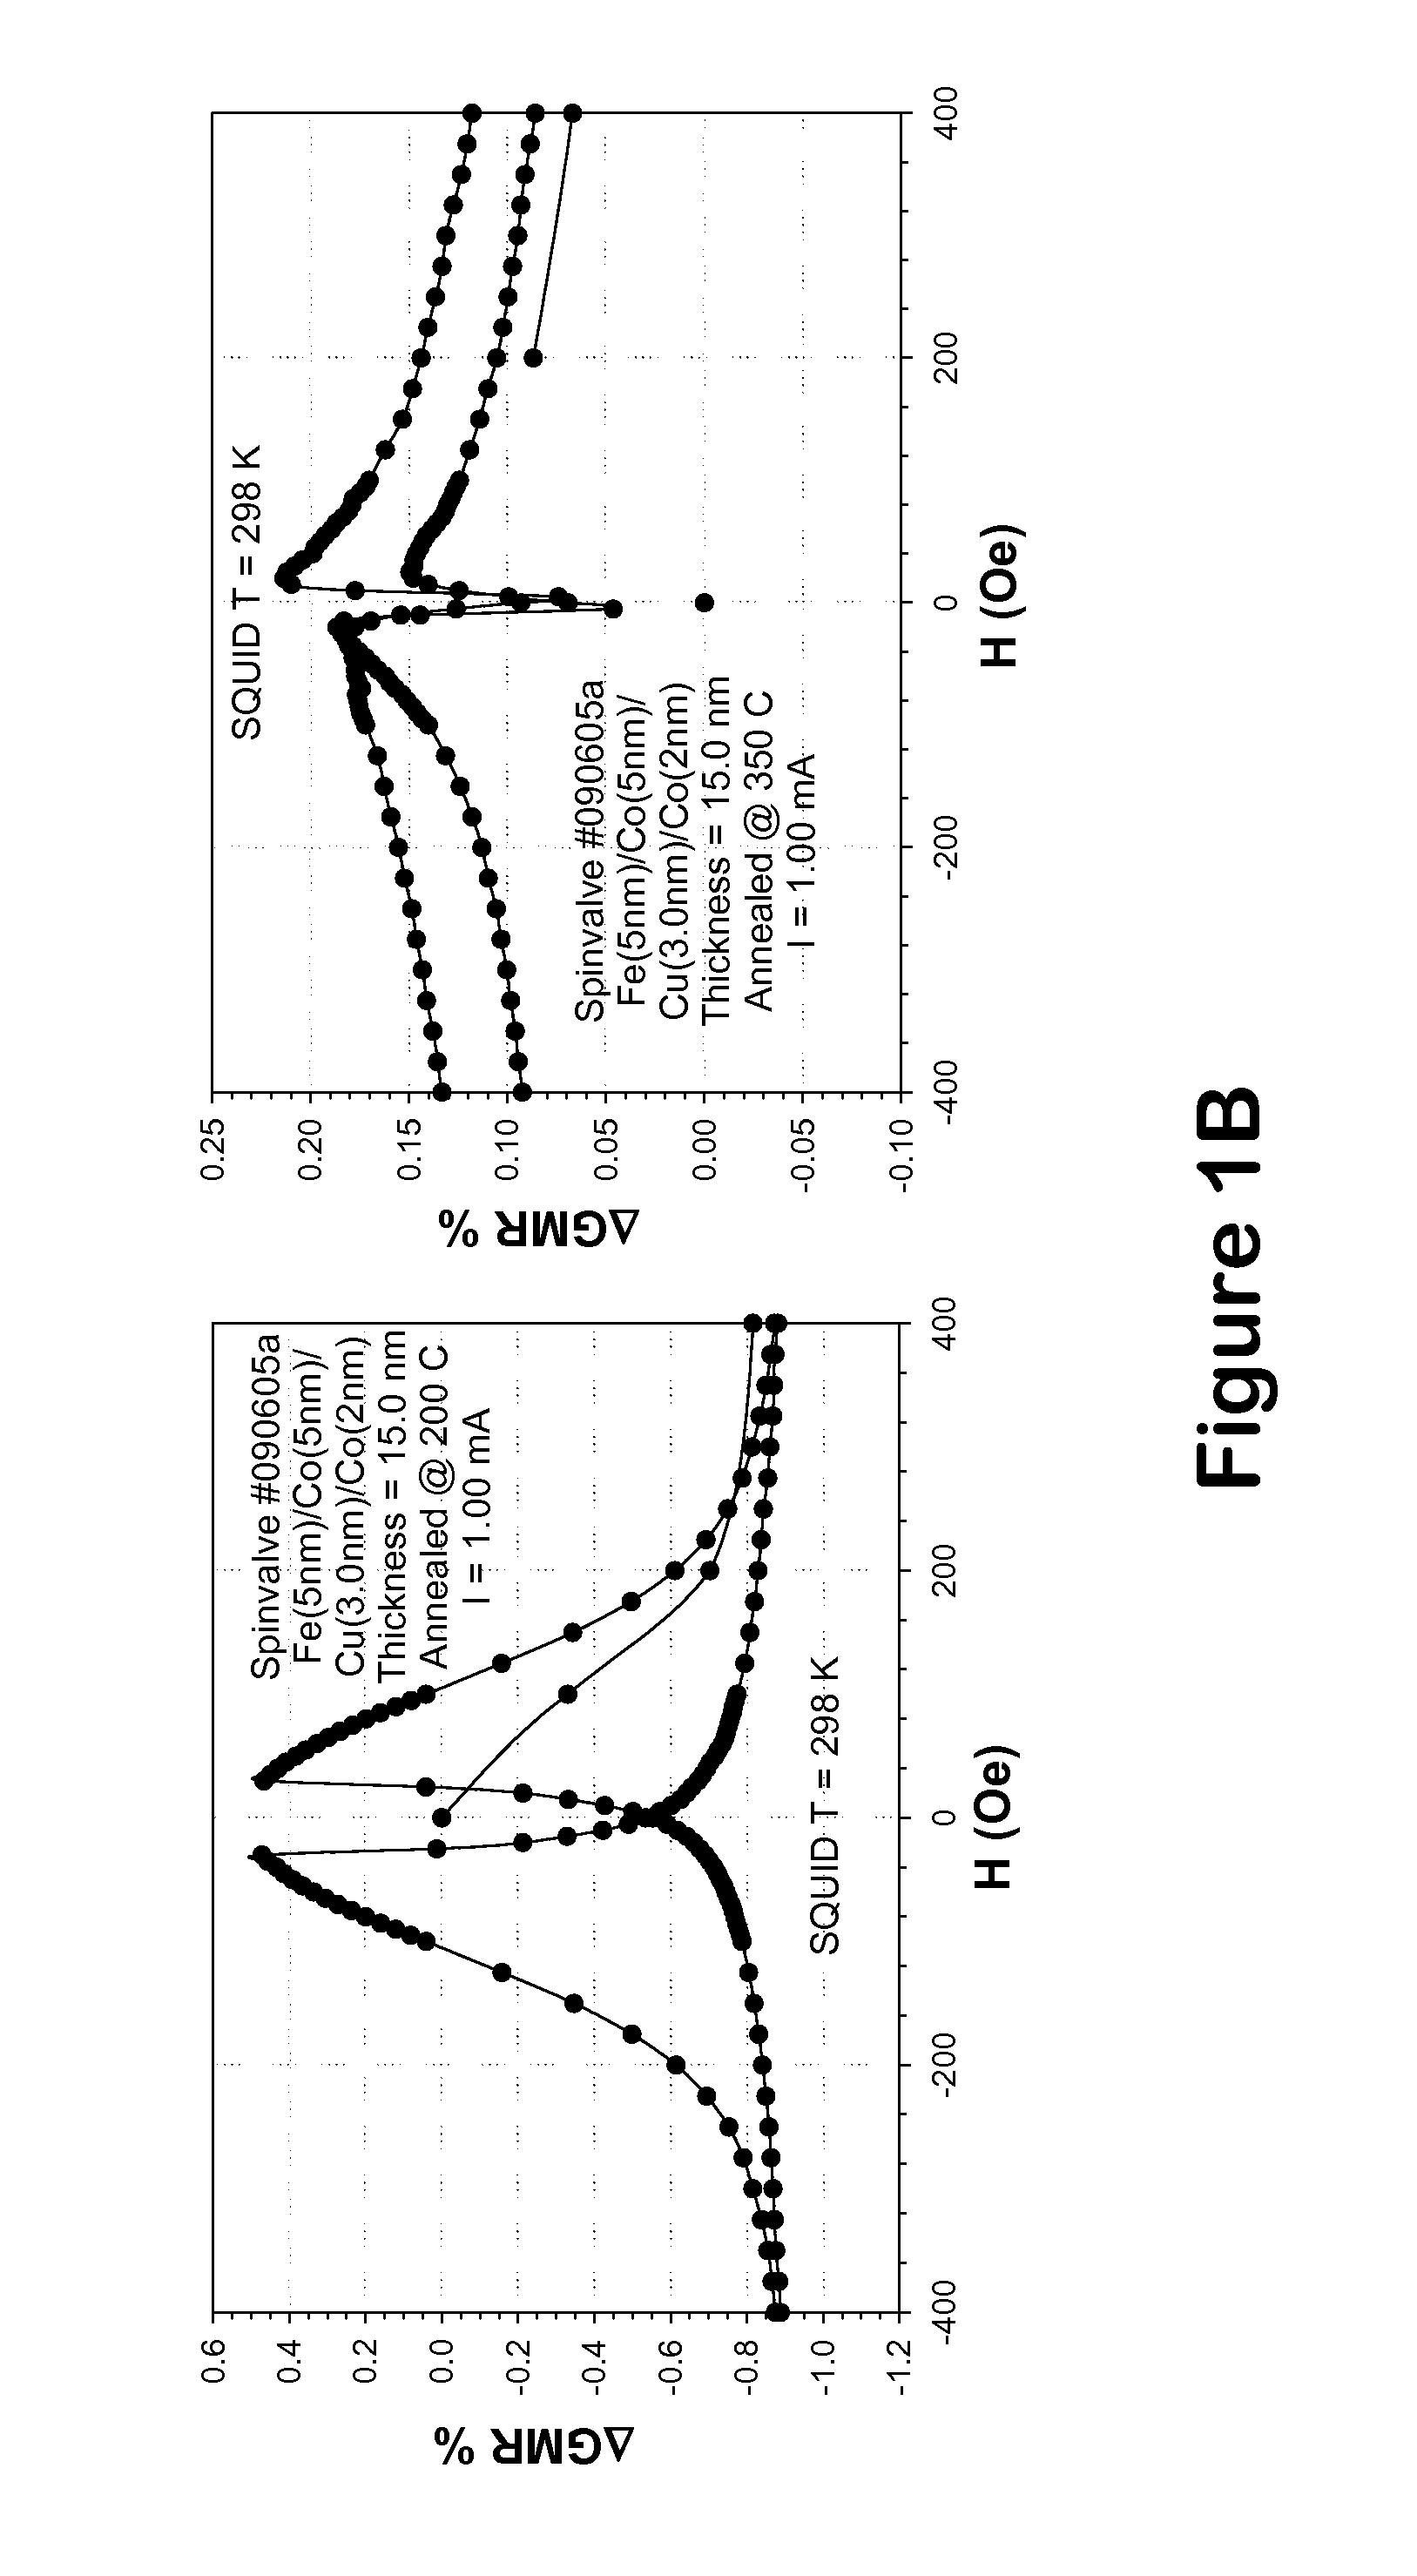 System and method for the fabrication, characterization and use of magnetic corrosion and chemical sensors